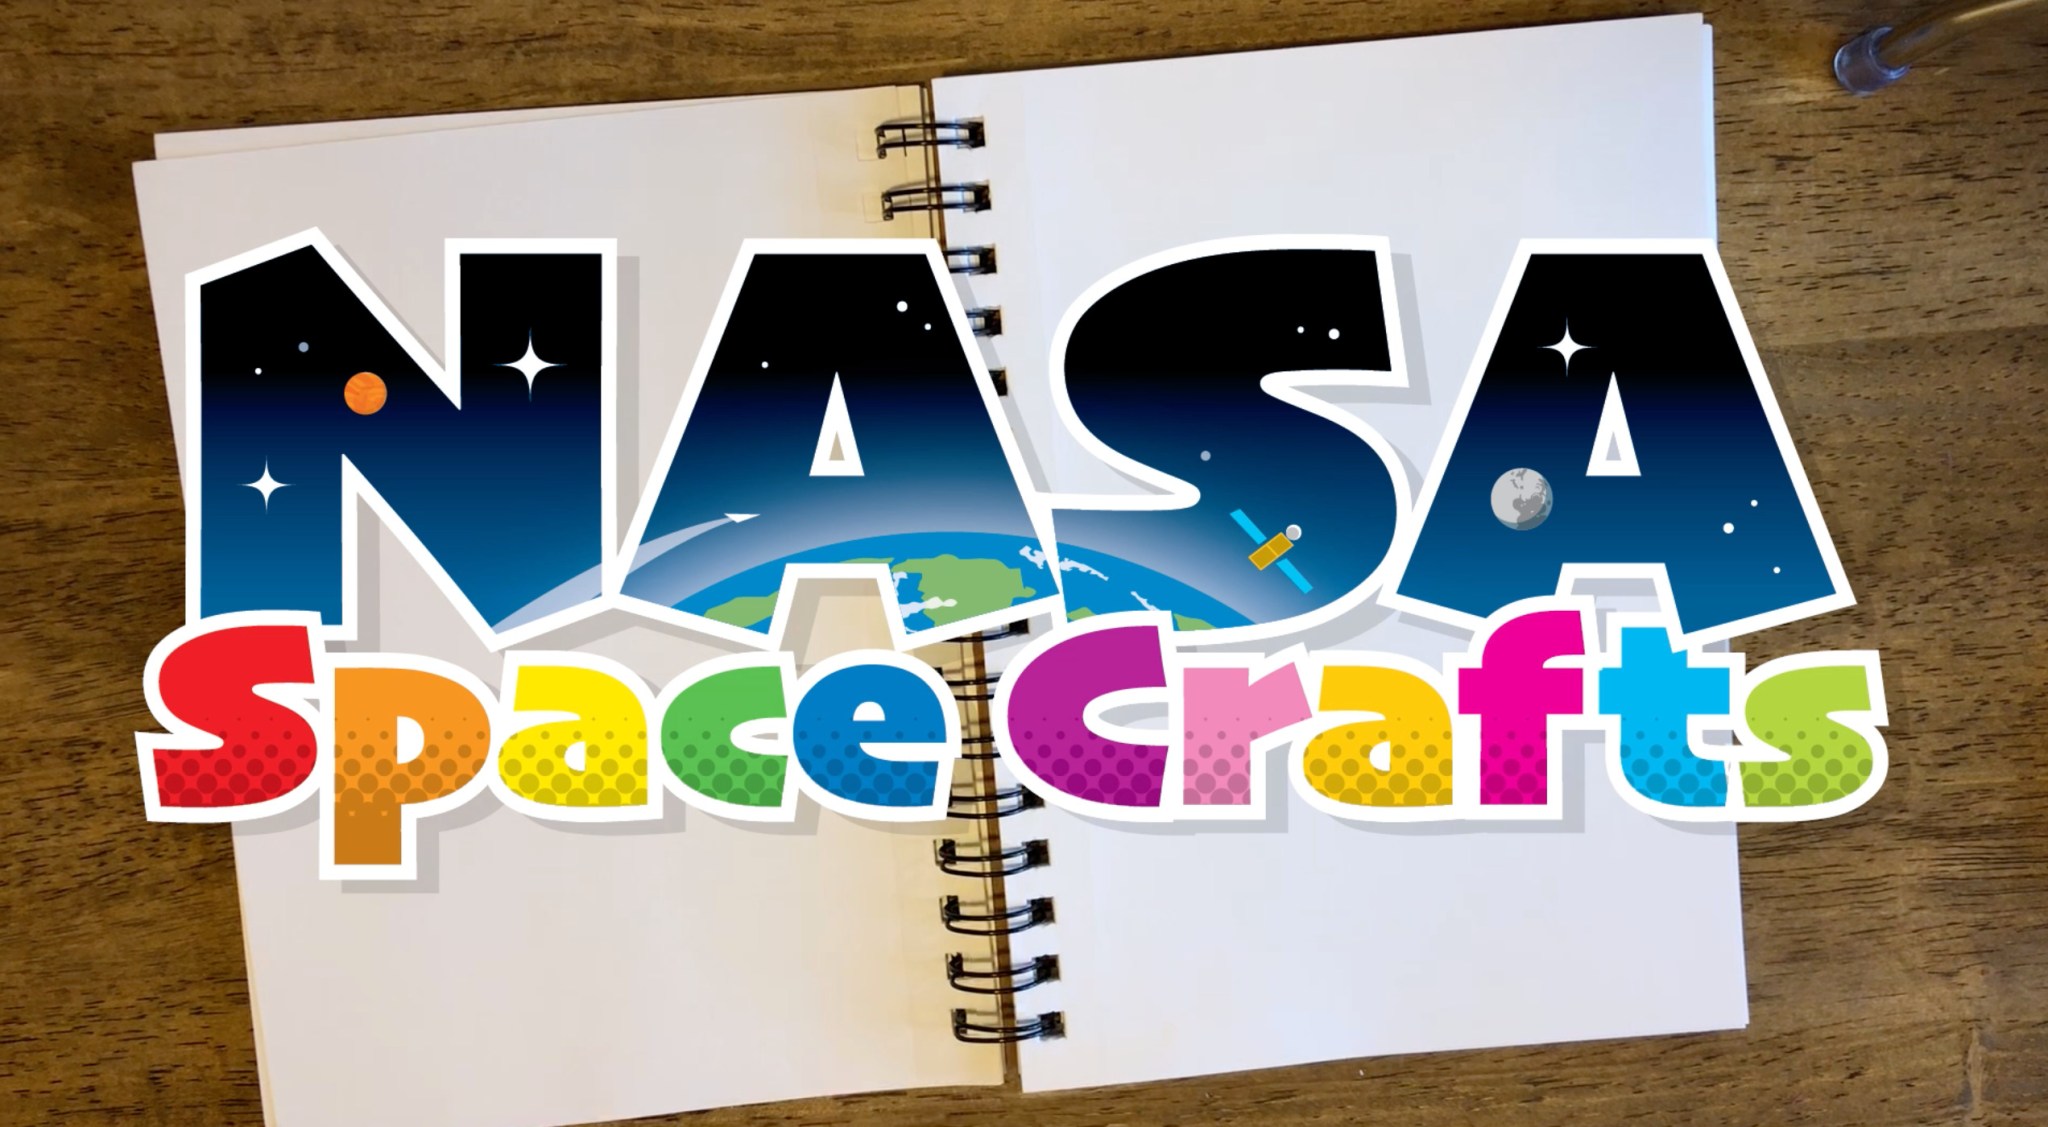 This is a graphic collage. A notebook is opened on a desk with the words "NASA Space Crafts" overlaid.